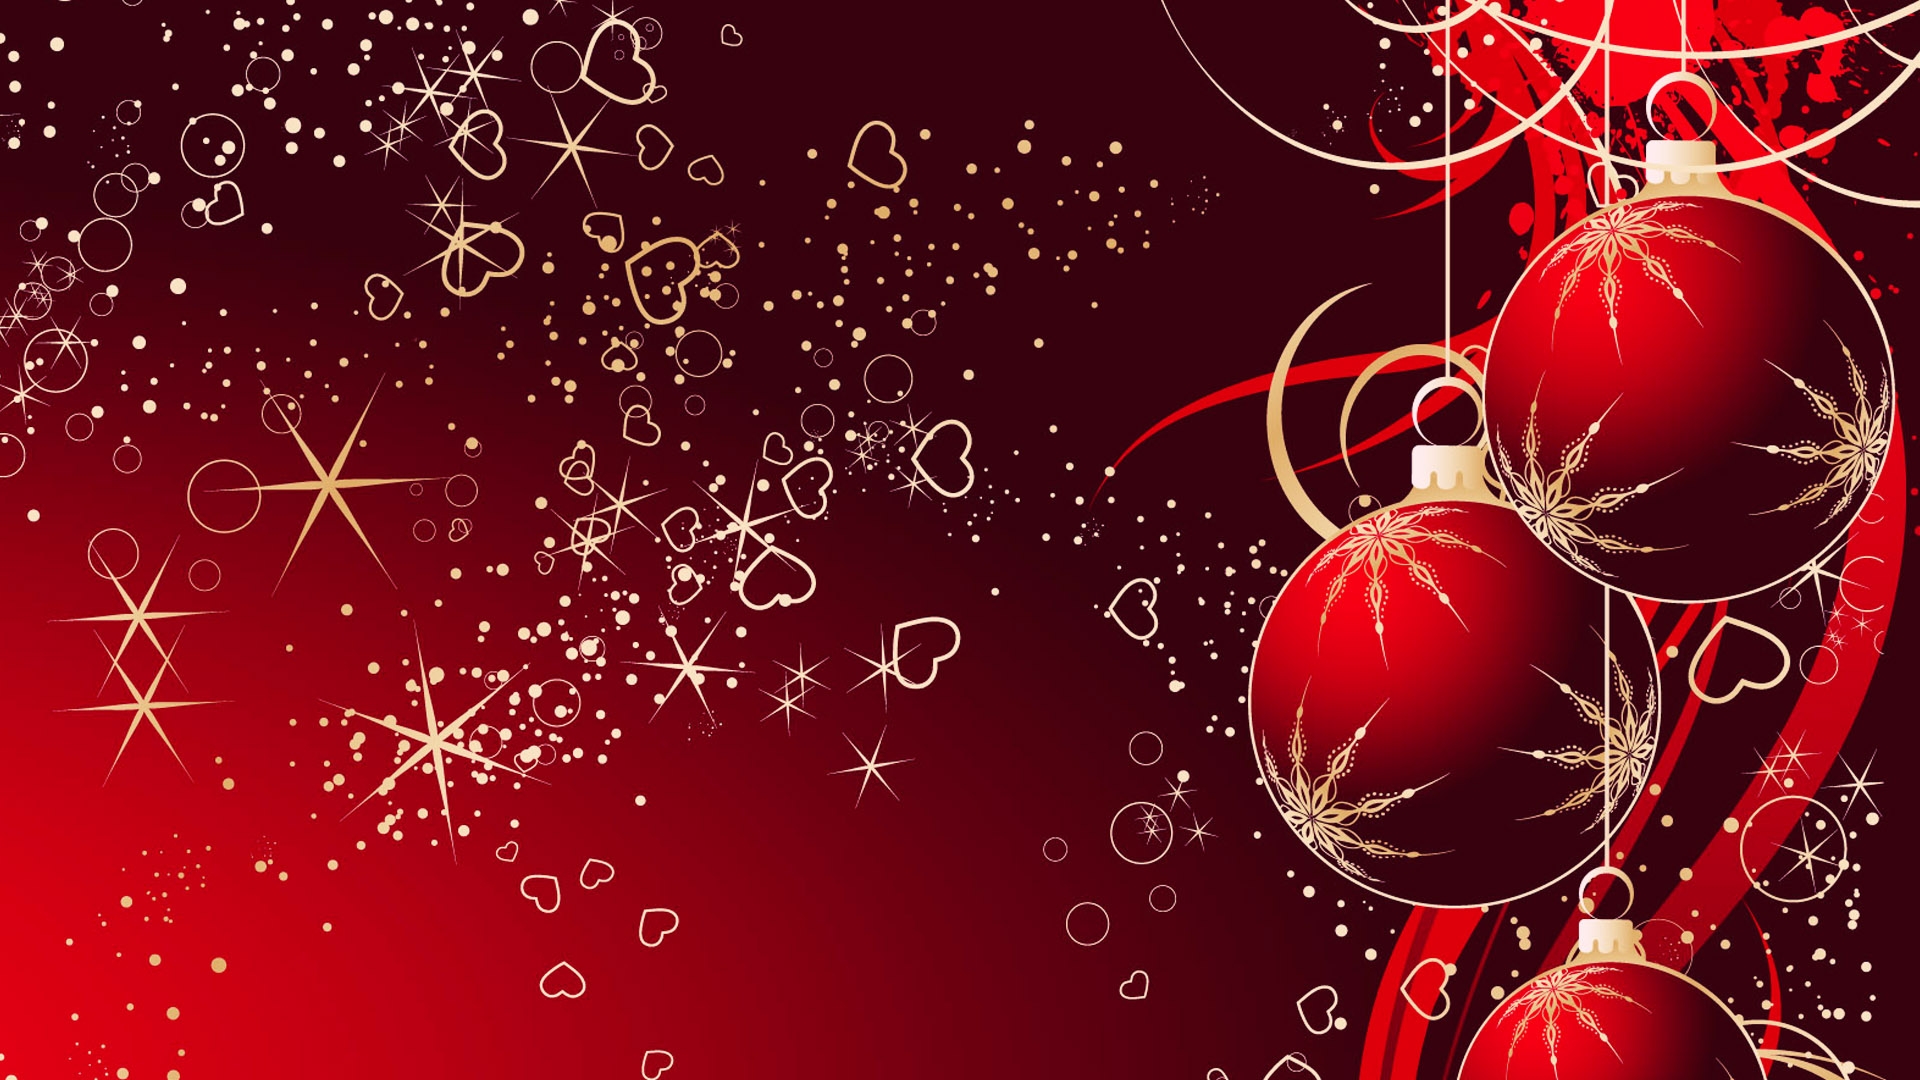 Christmas Background Wallpaper Free Download